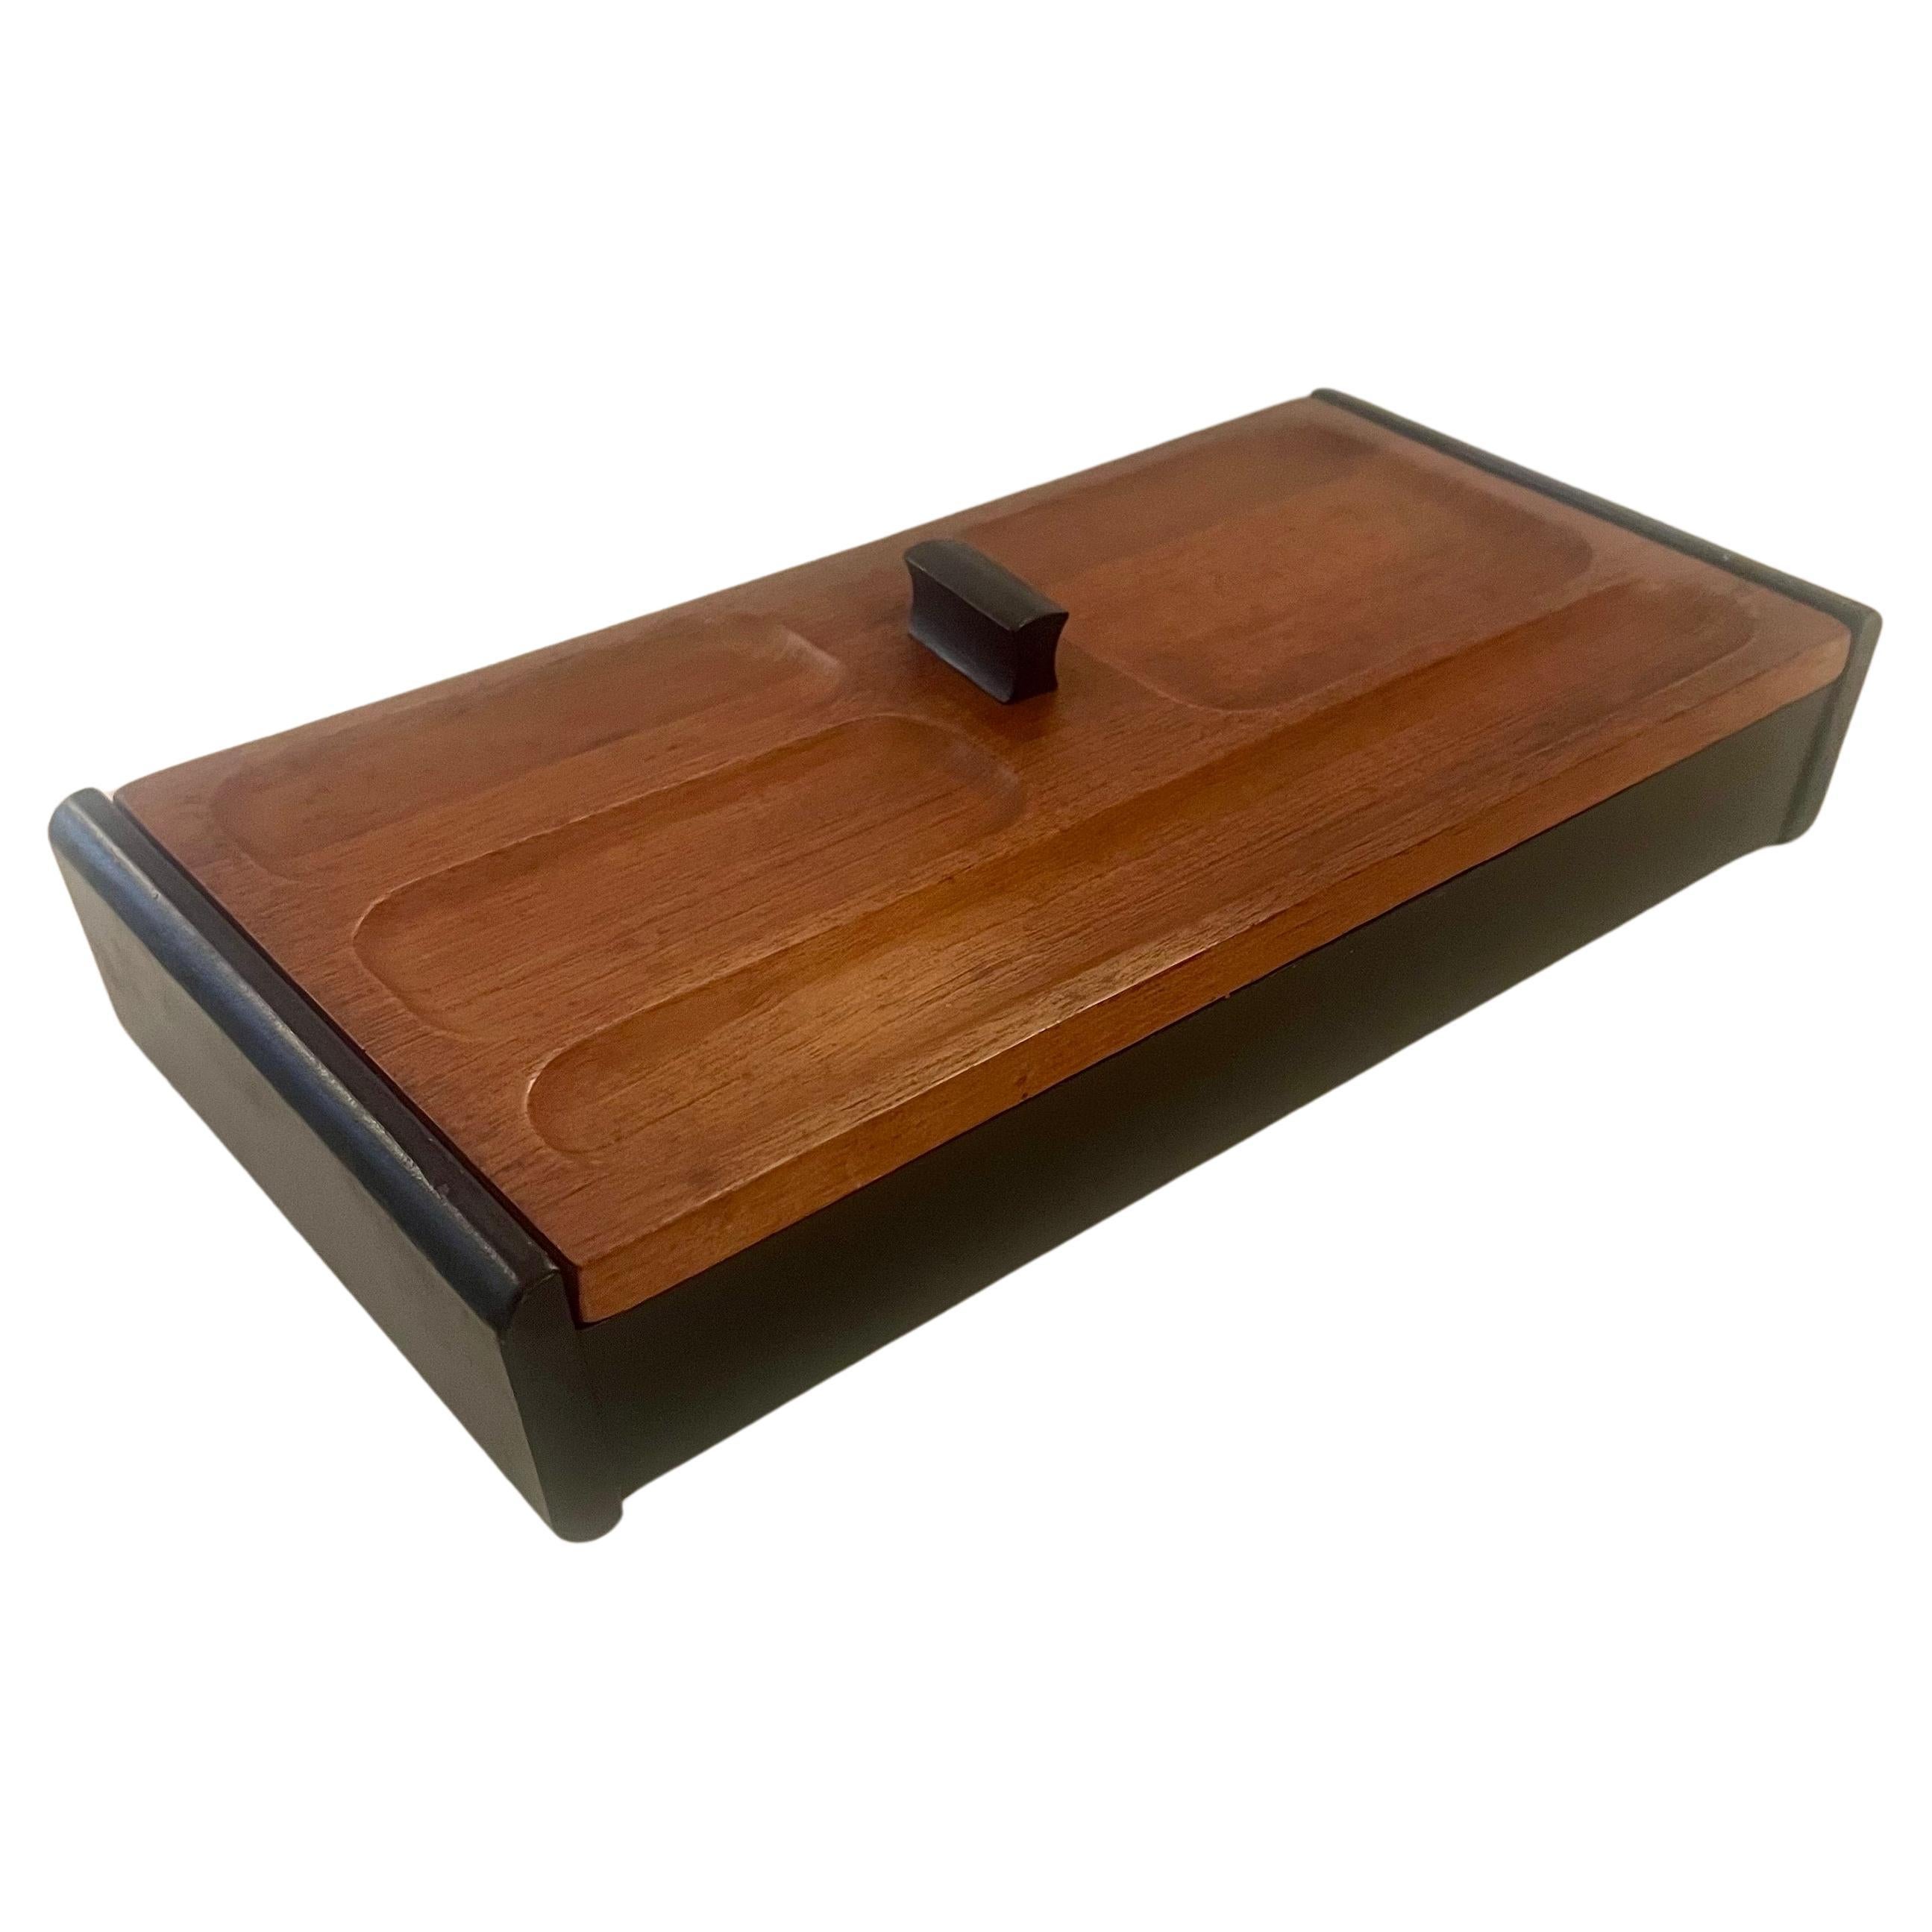 20th Century Danish Modern Solid Teak Desk Top Jewelry Box Made in Japan For Sale